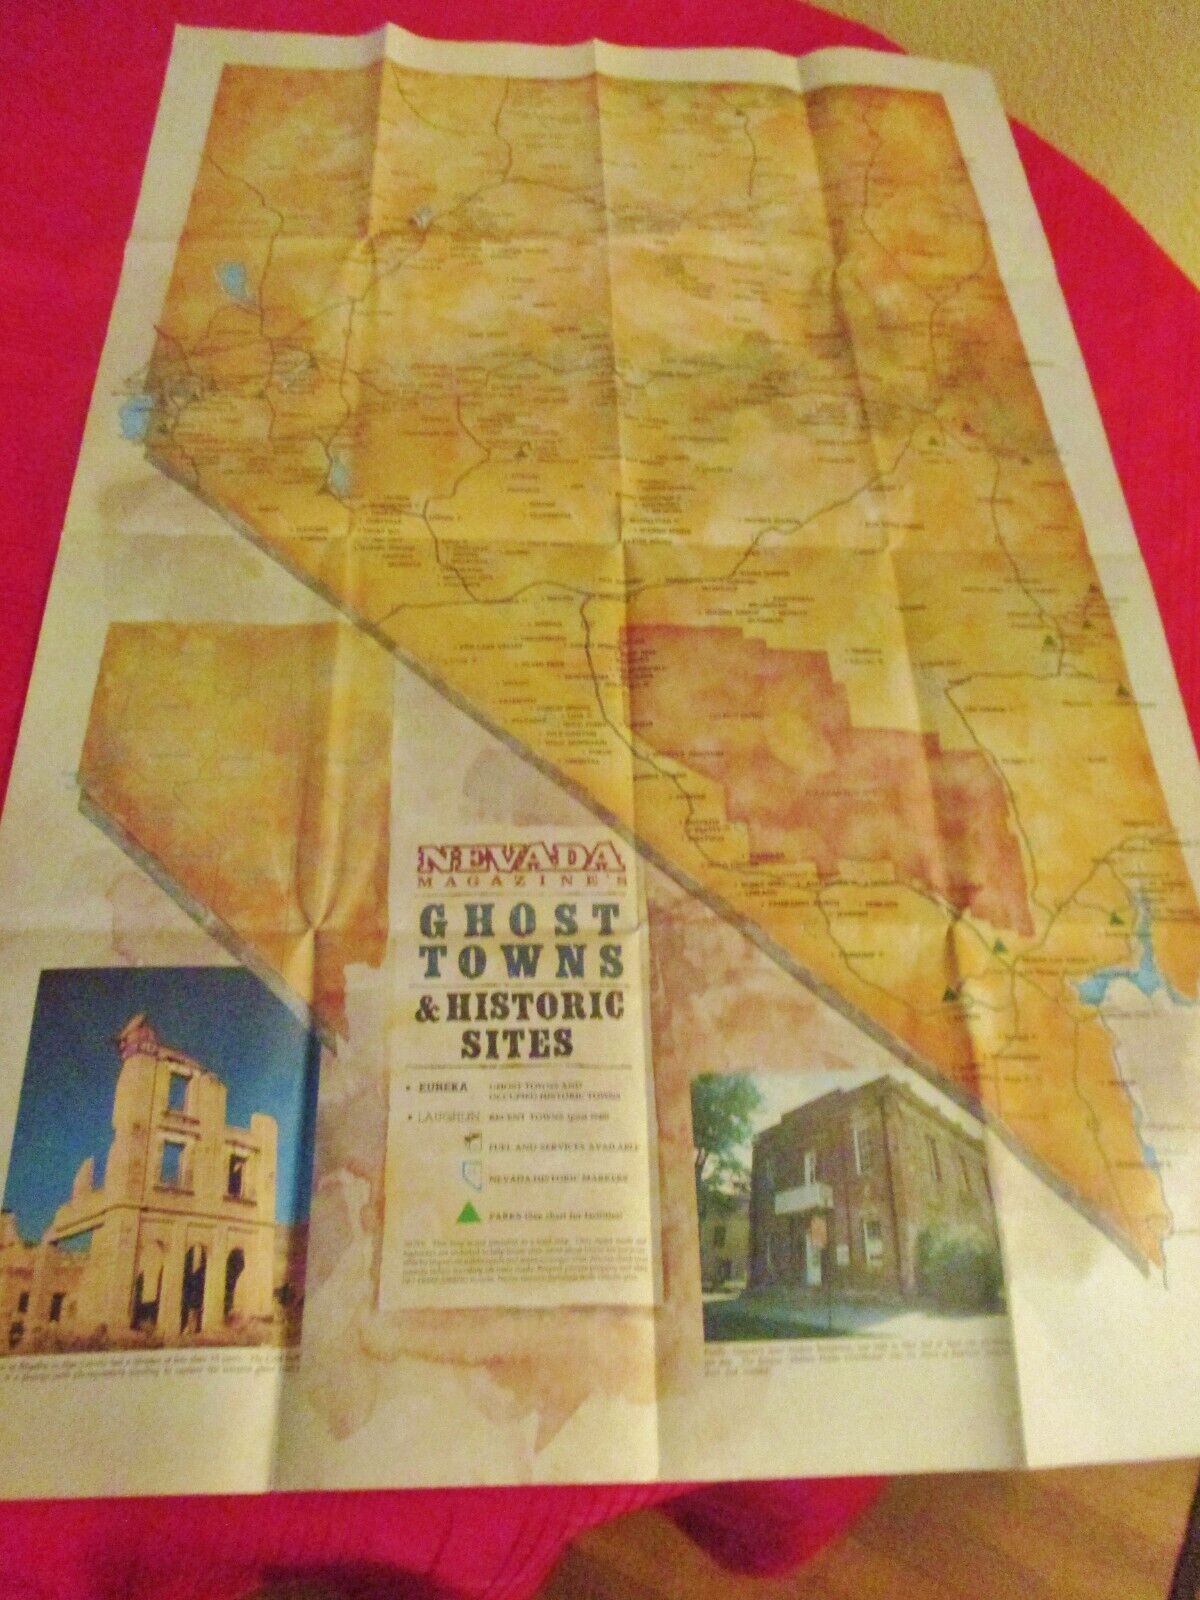 NEVADA MAGAZINE'S GHOST TOWNS & HISTORIC SITES MAP ---CIRCA 1980'S